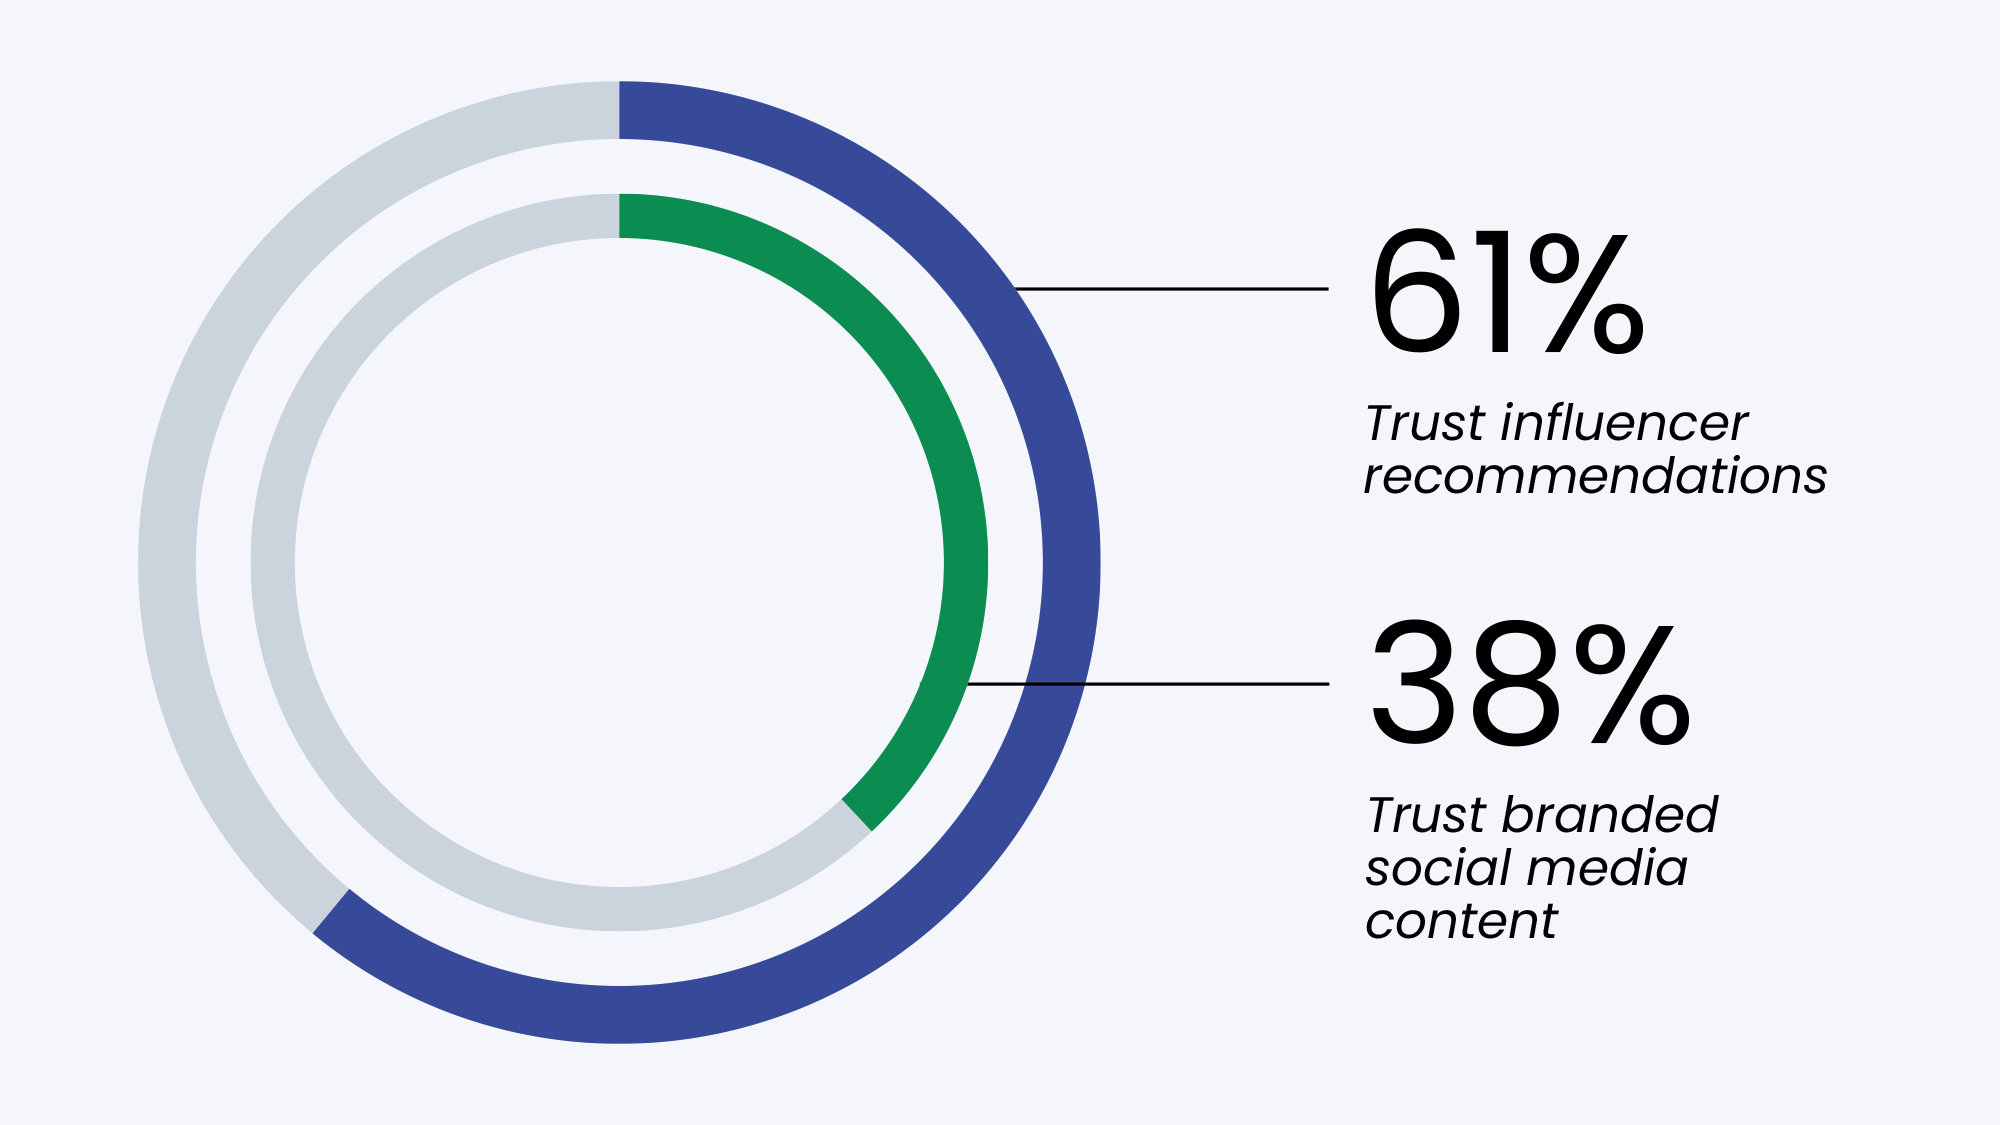 consumers trusting influencers more than brands